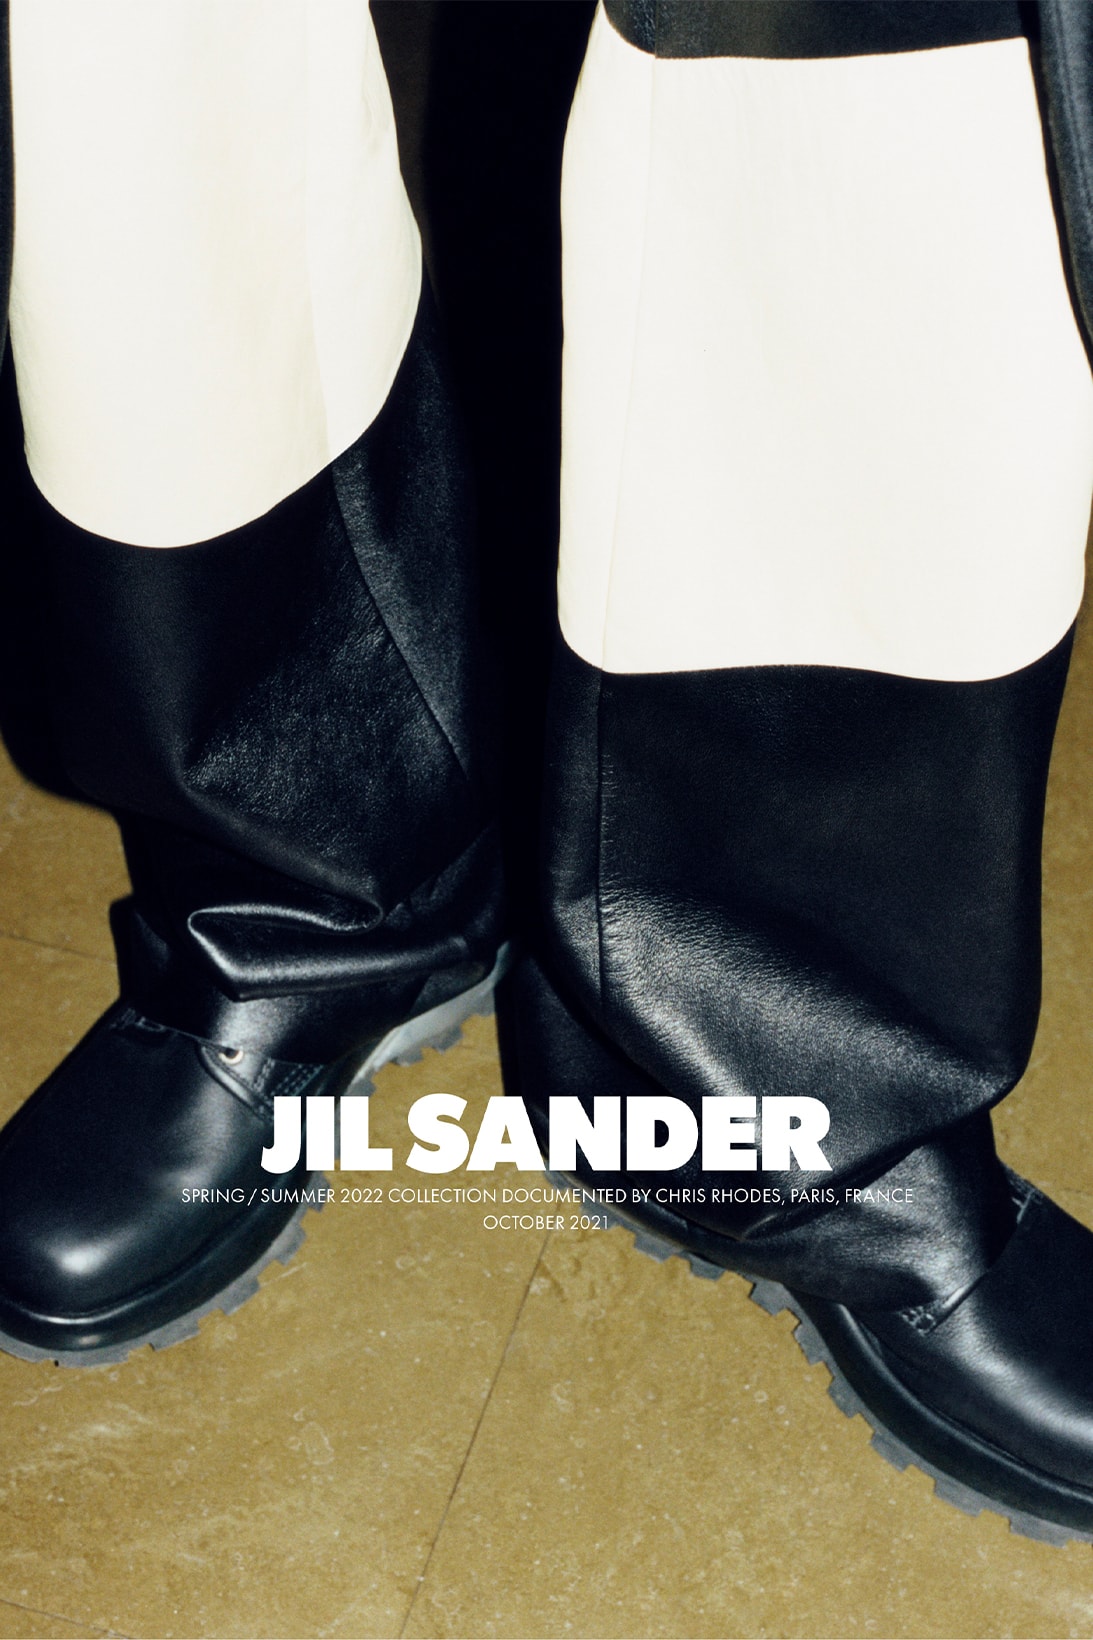 Jil Sander Spring Summer 2022 Collection Advertising Campaign Modern Photography Experimental Cinema Book